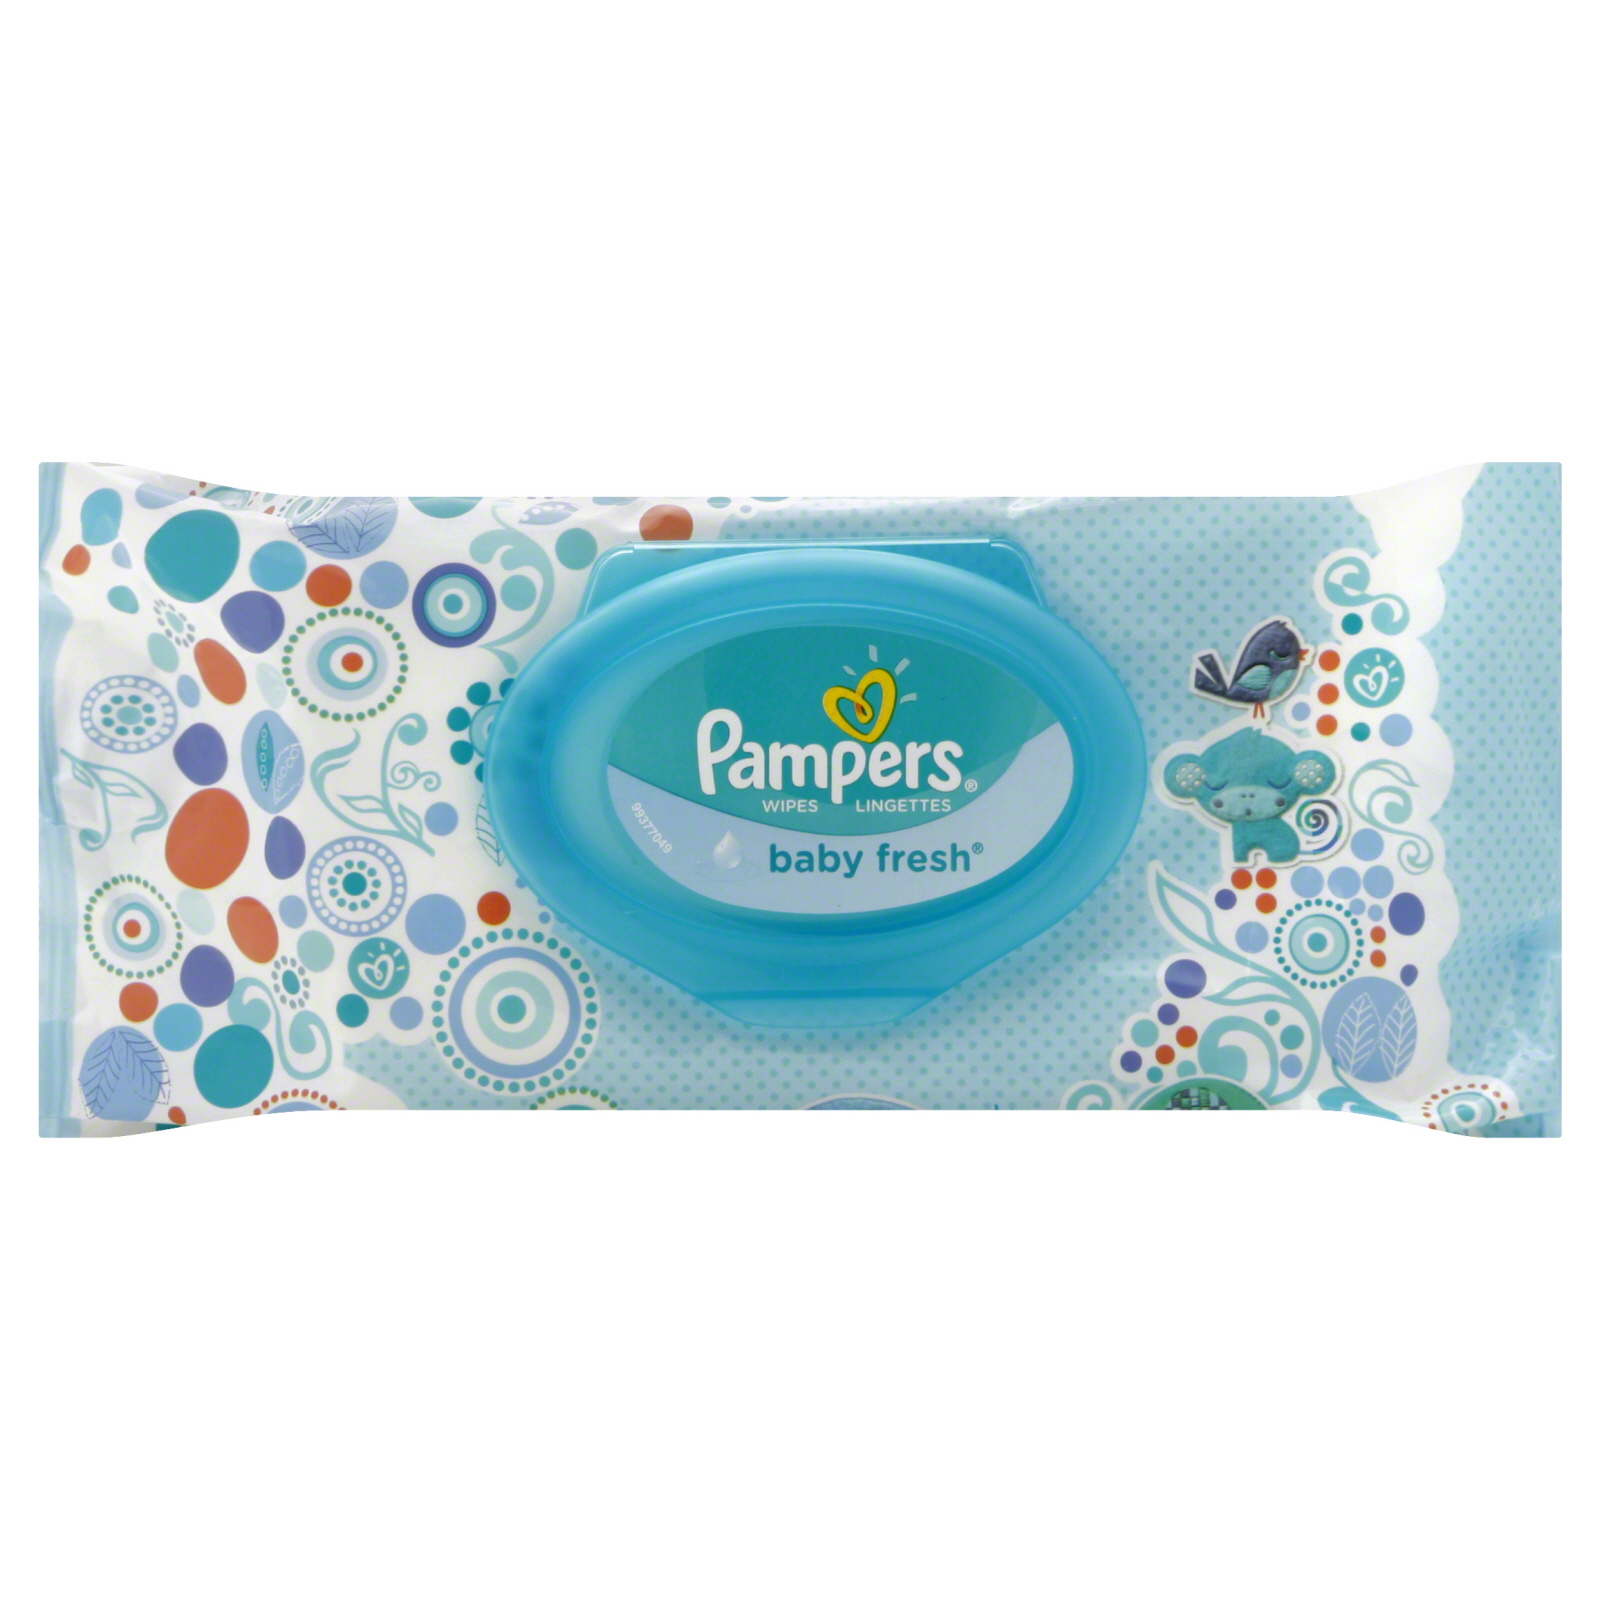 Pampers Baby Wipes Baby Fresh 1 pack, 64 wipes